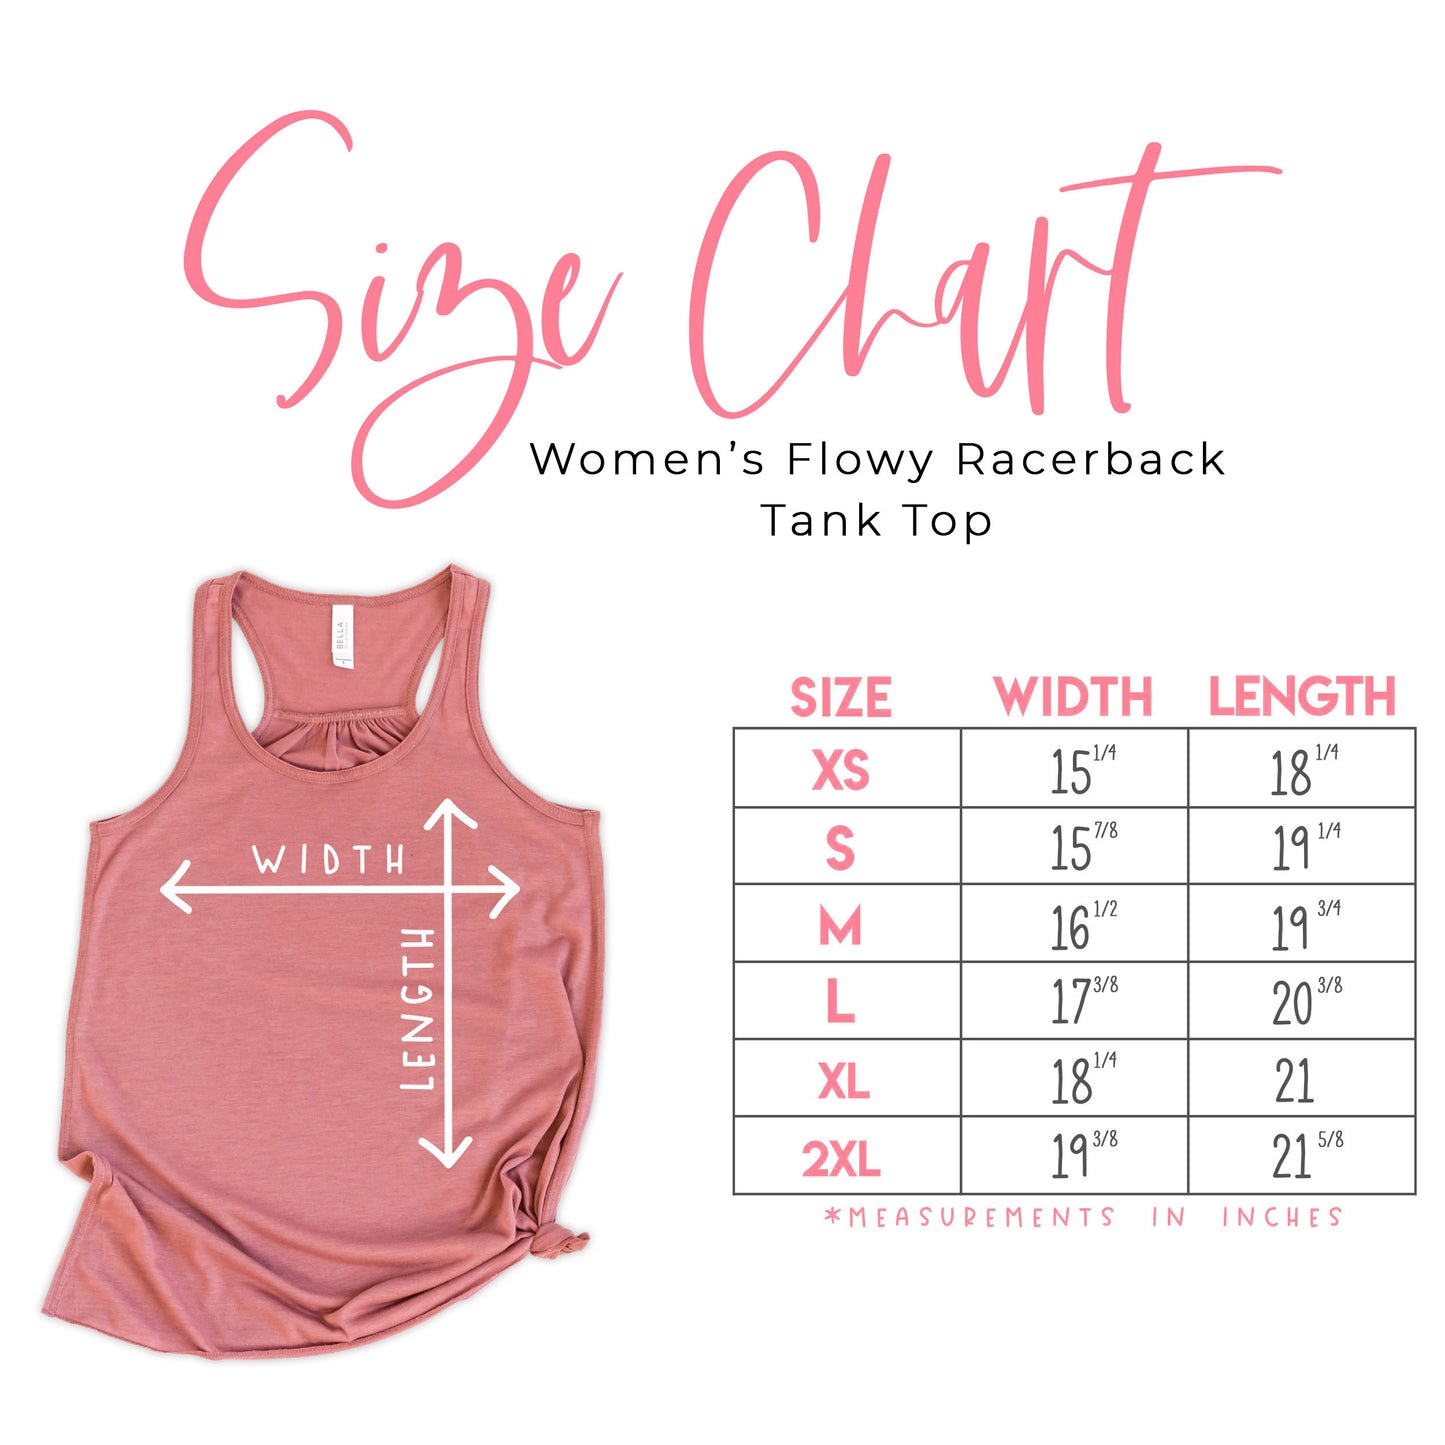 Out of Office Tank Top